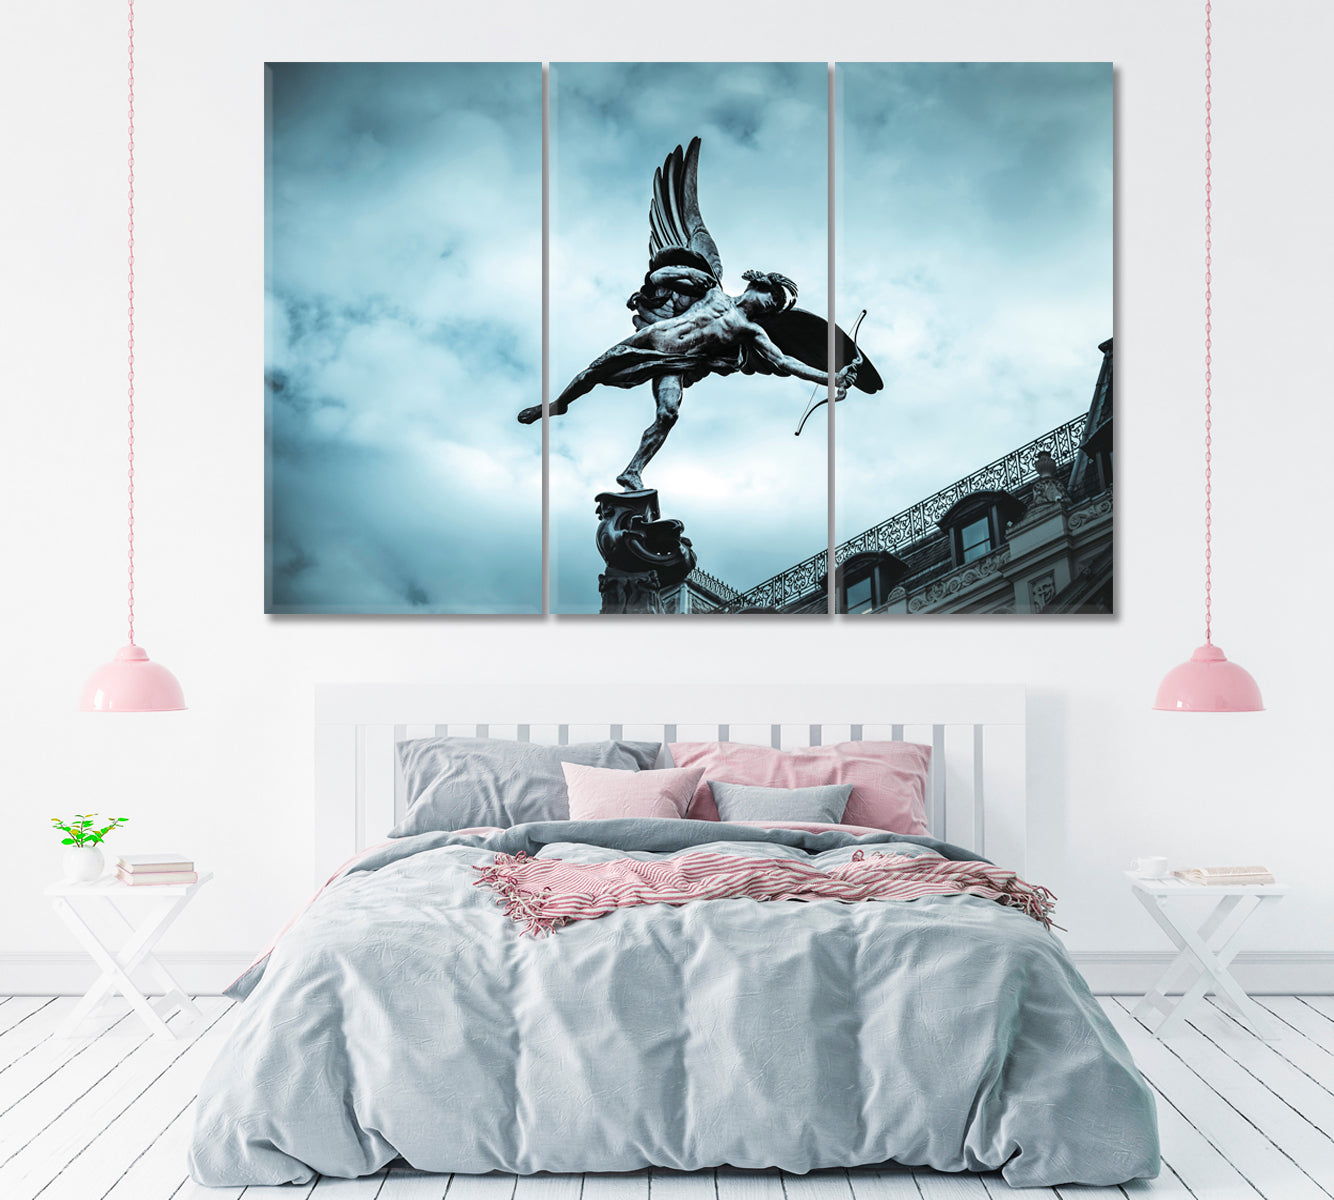 Shaftesbury Memorial Fountain Statue of Eros London Canvas Print ArtLexy 3 Panels 36"x24" inches 